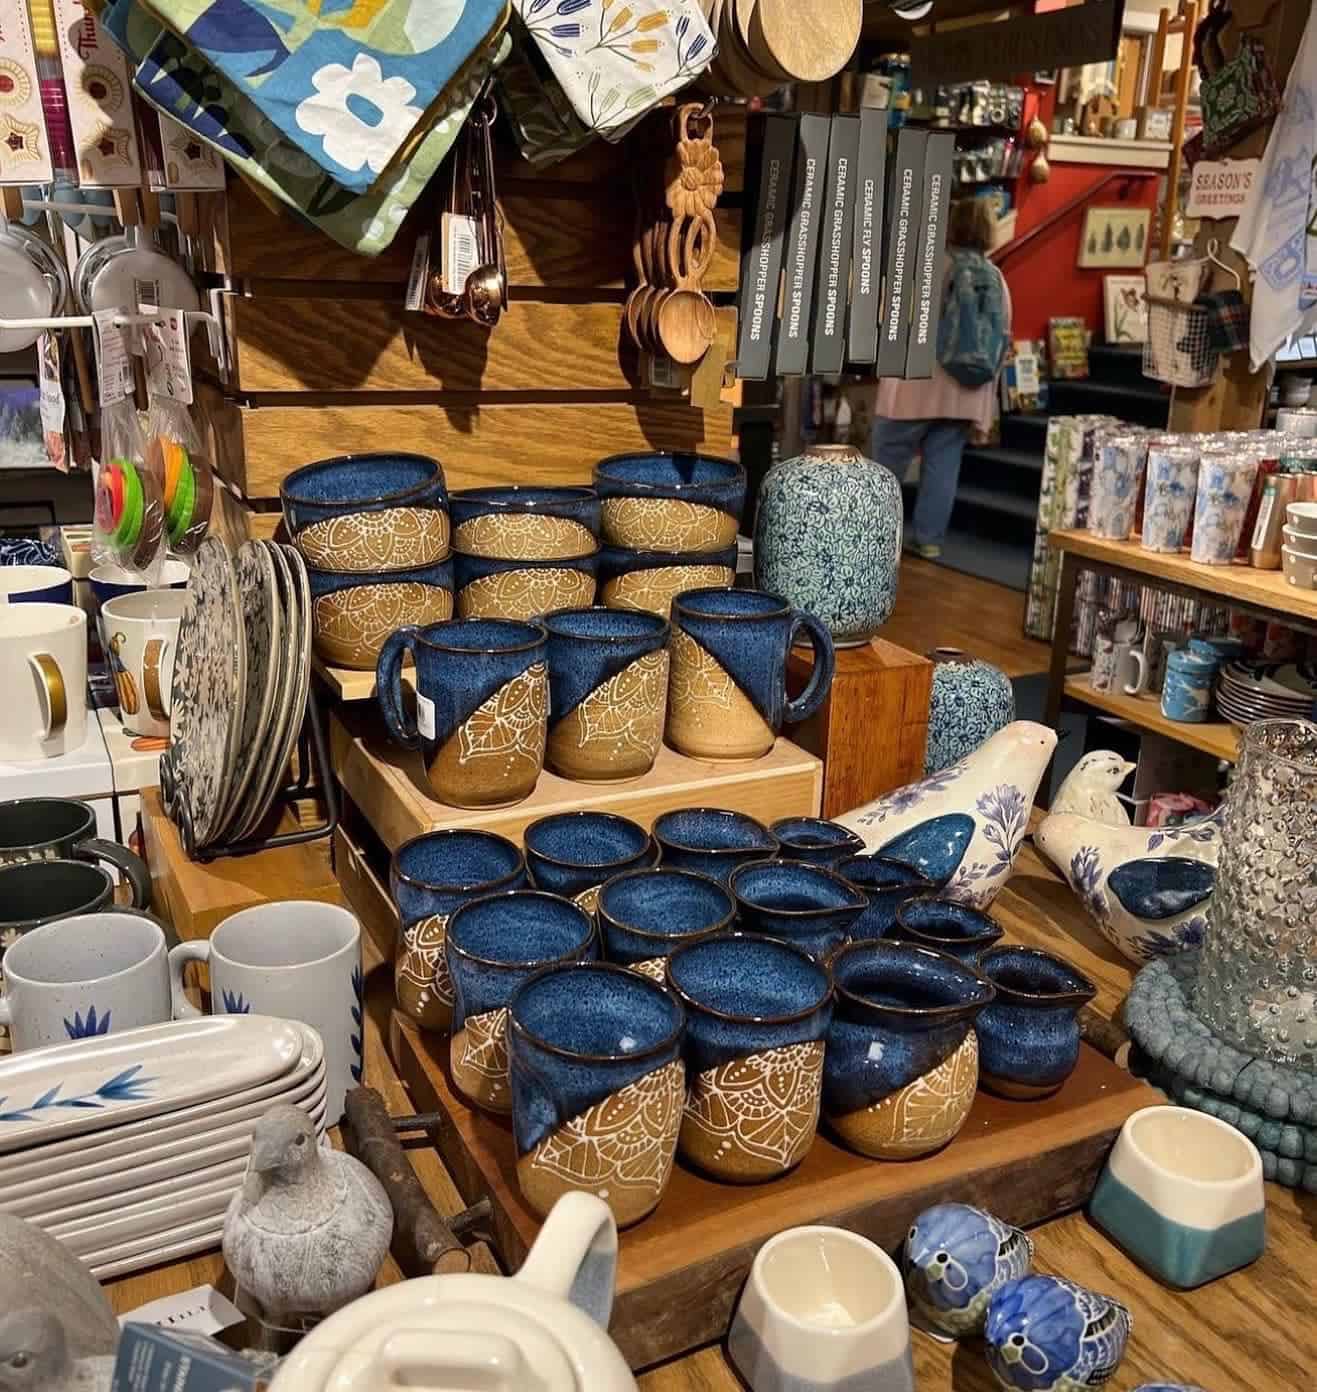 Northshire Bookstore - Pottery & Gifts